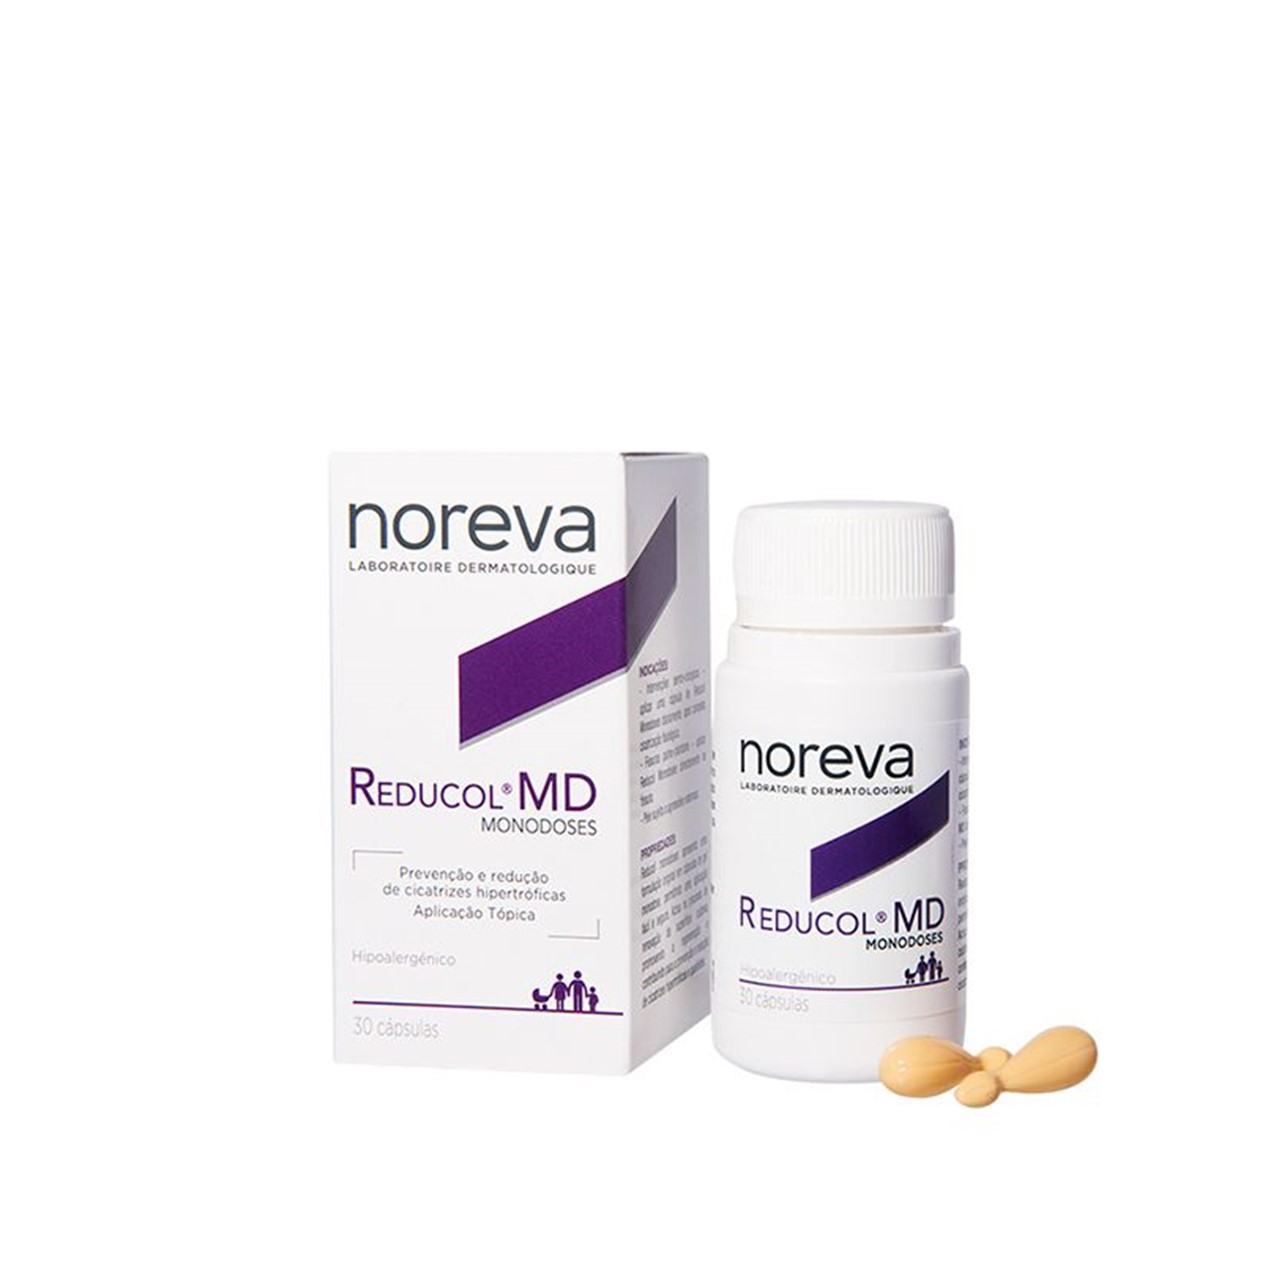 Noreva products » Compare prices and see offers now